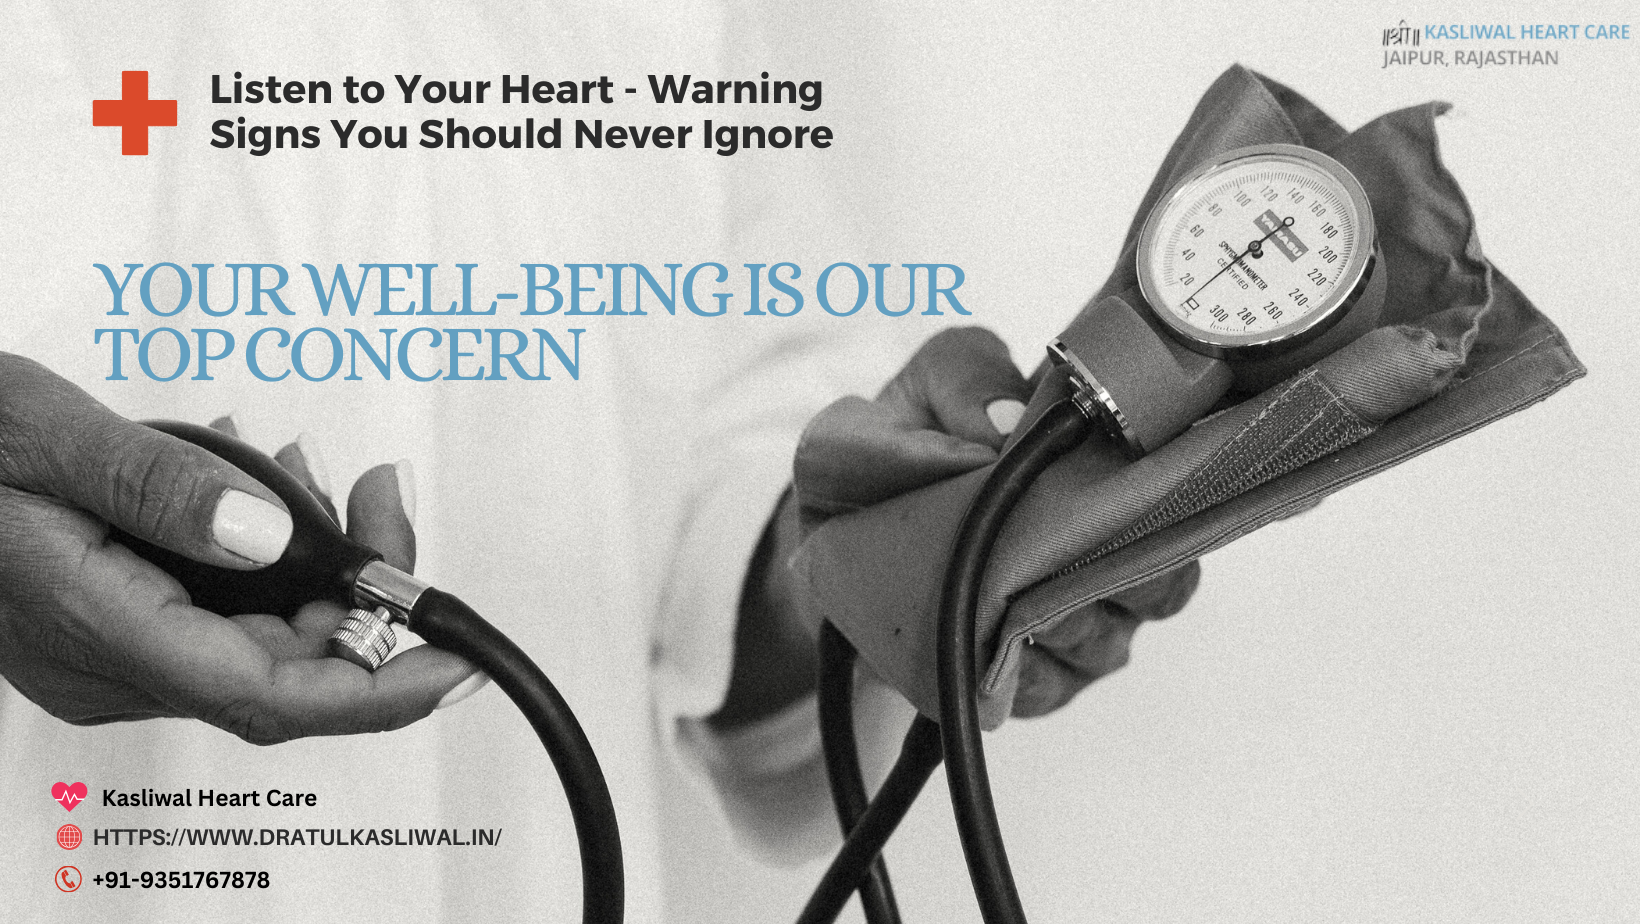 Listen to Your Heart - Warning Signs You Should Never Ignore